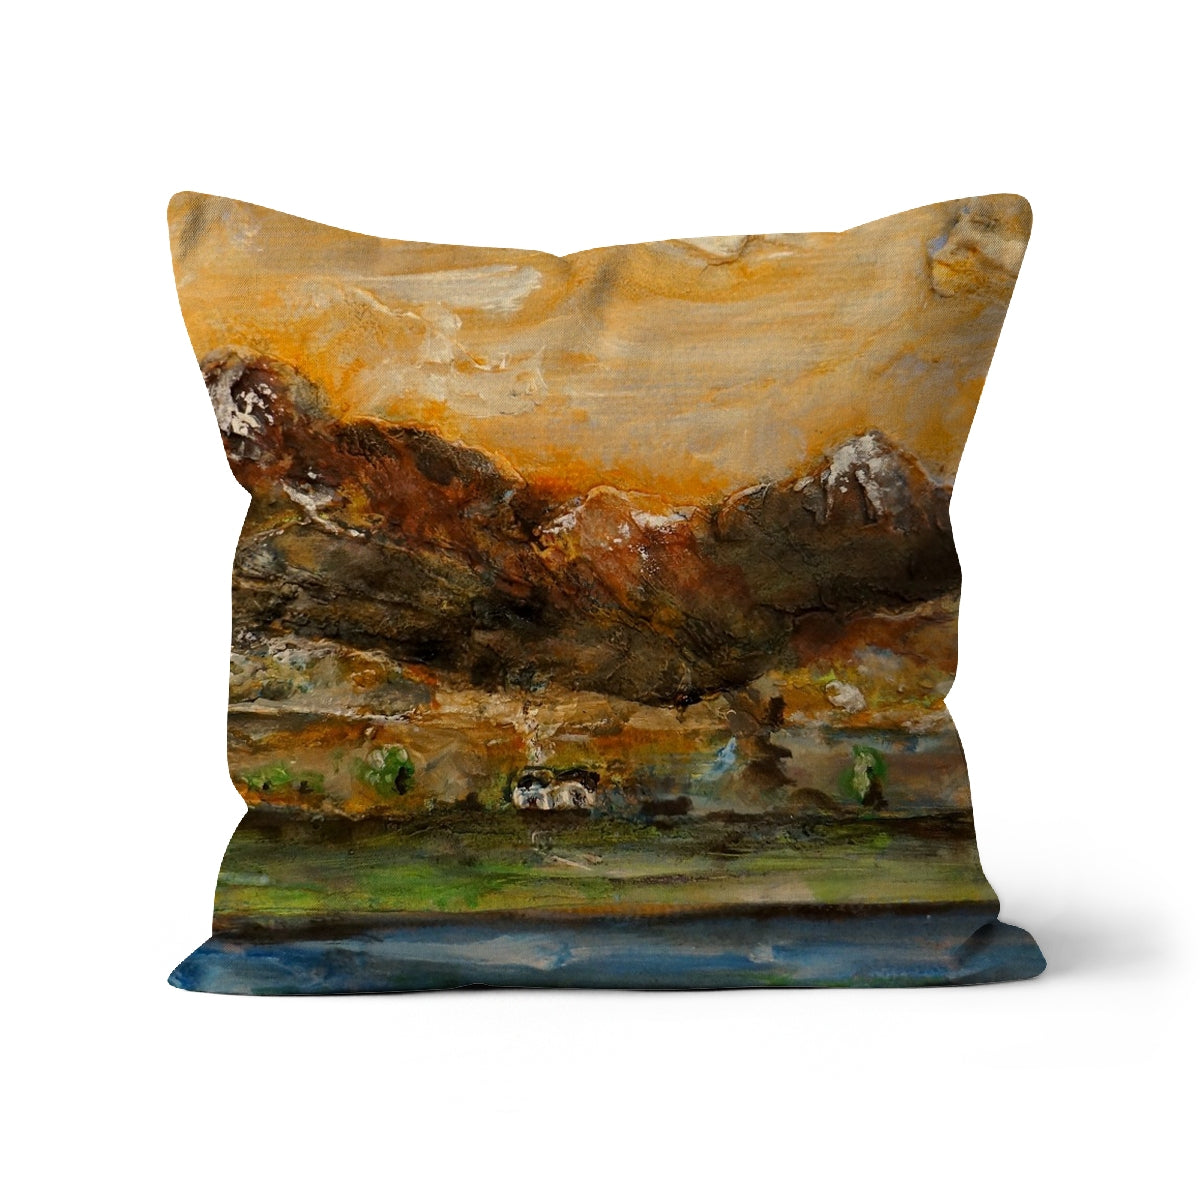 A Glencoe Cottage Art Gifts Cushion-Cushions-Glencoe Art Gallery-Faux Suede-22"x22"-Paintings, Prints, Homeware, Art Gifts From Scotland By Scottish Artist Kevin Hunter